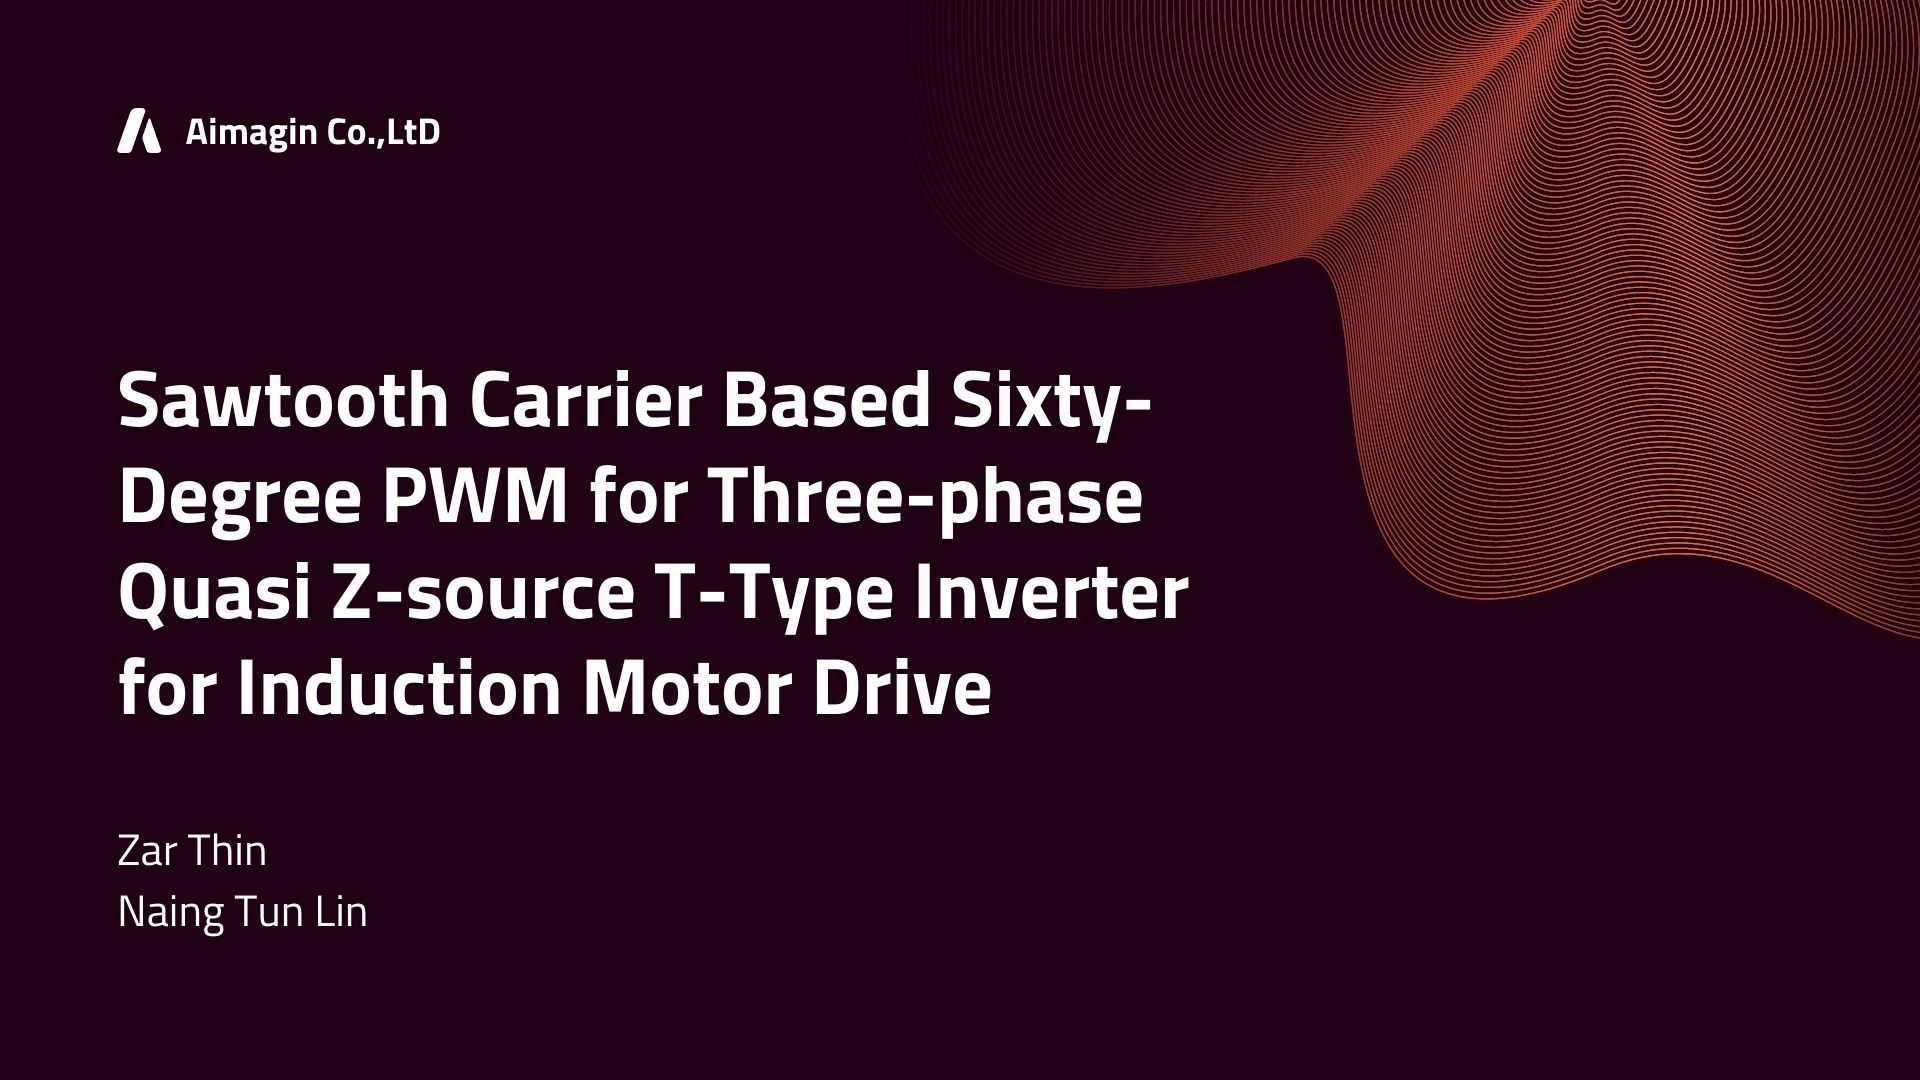 Sawtooth Carrier Based Sixty-Degree PWM for Three-phase Quasi Z-source T-Type Inverter for Induction Motor Drive